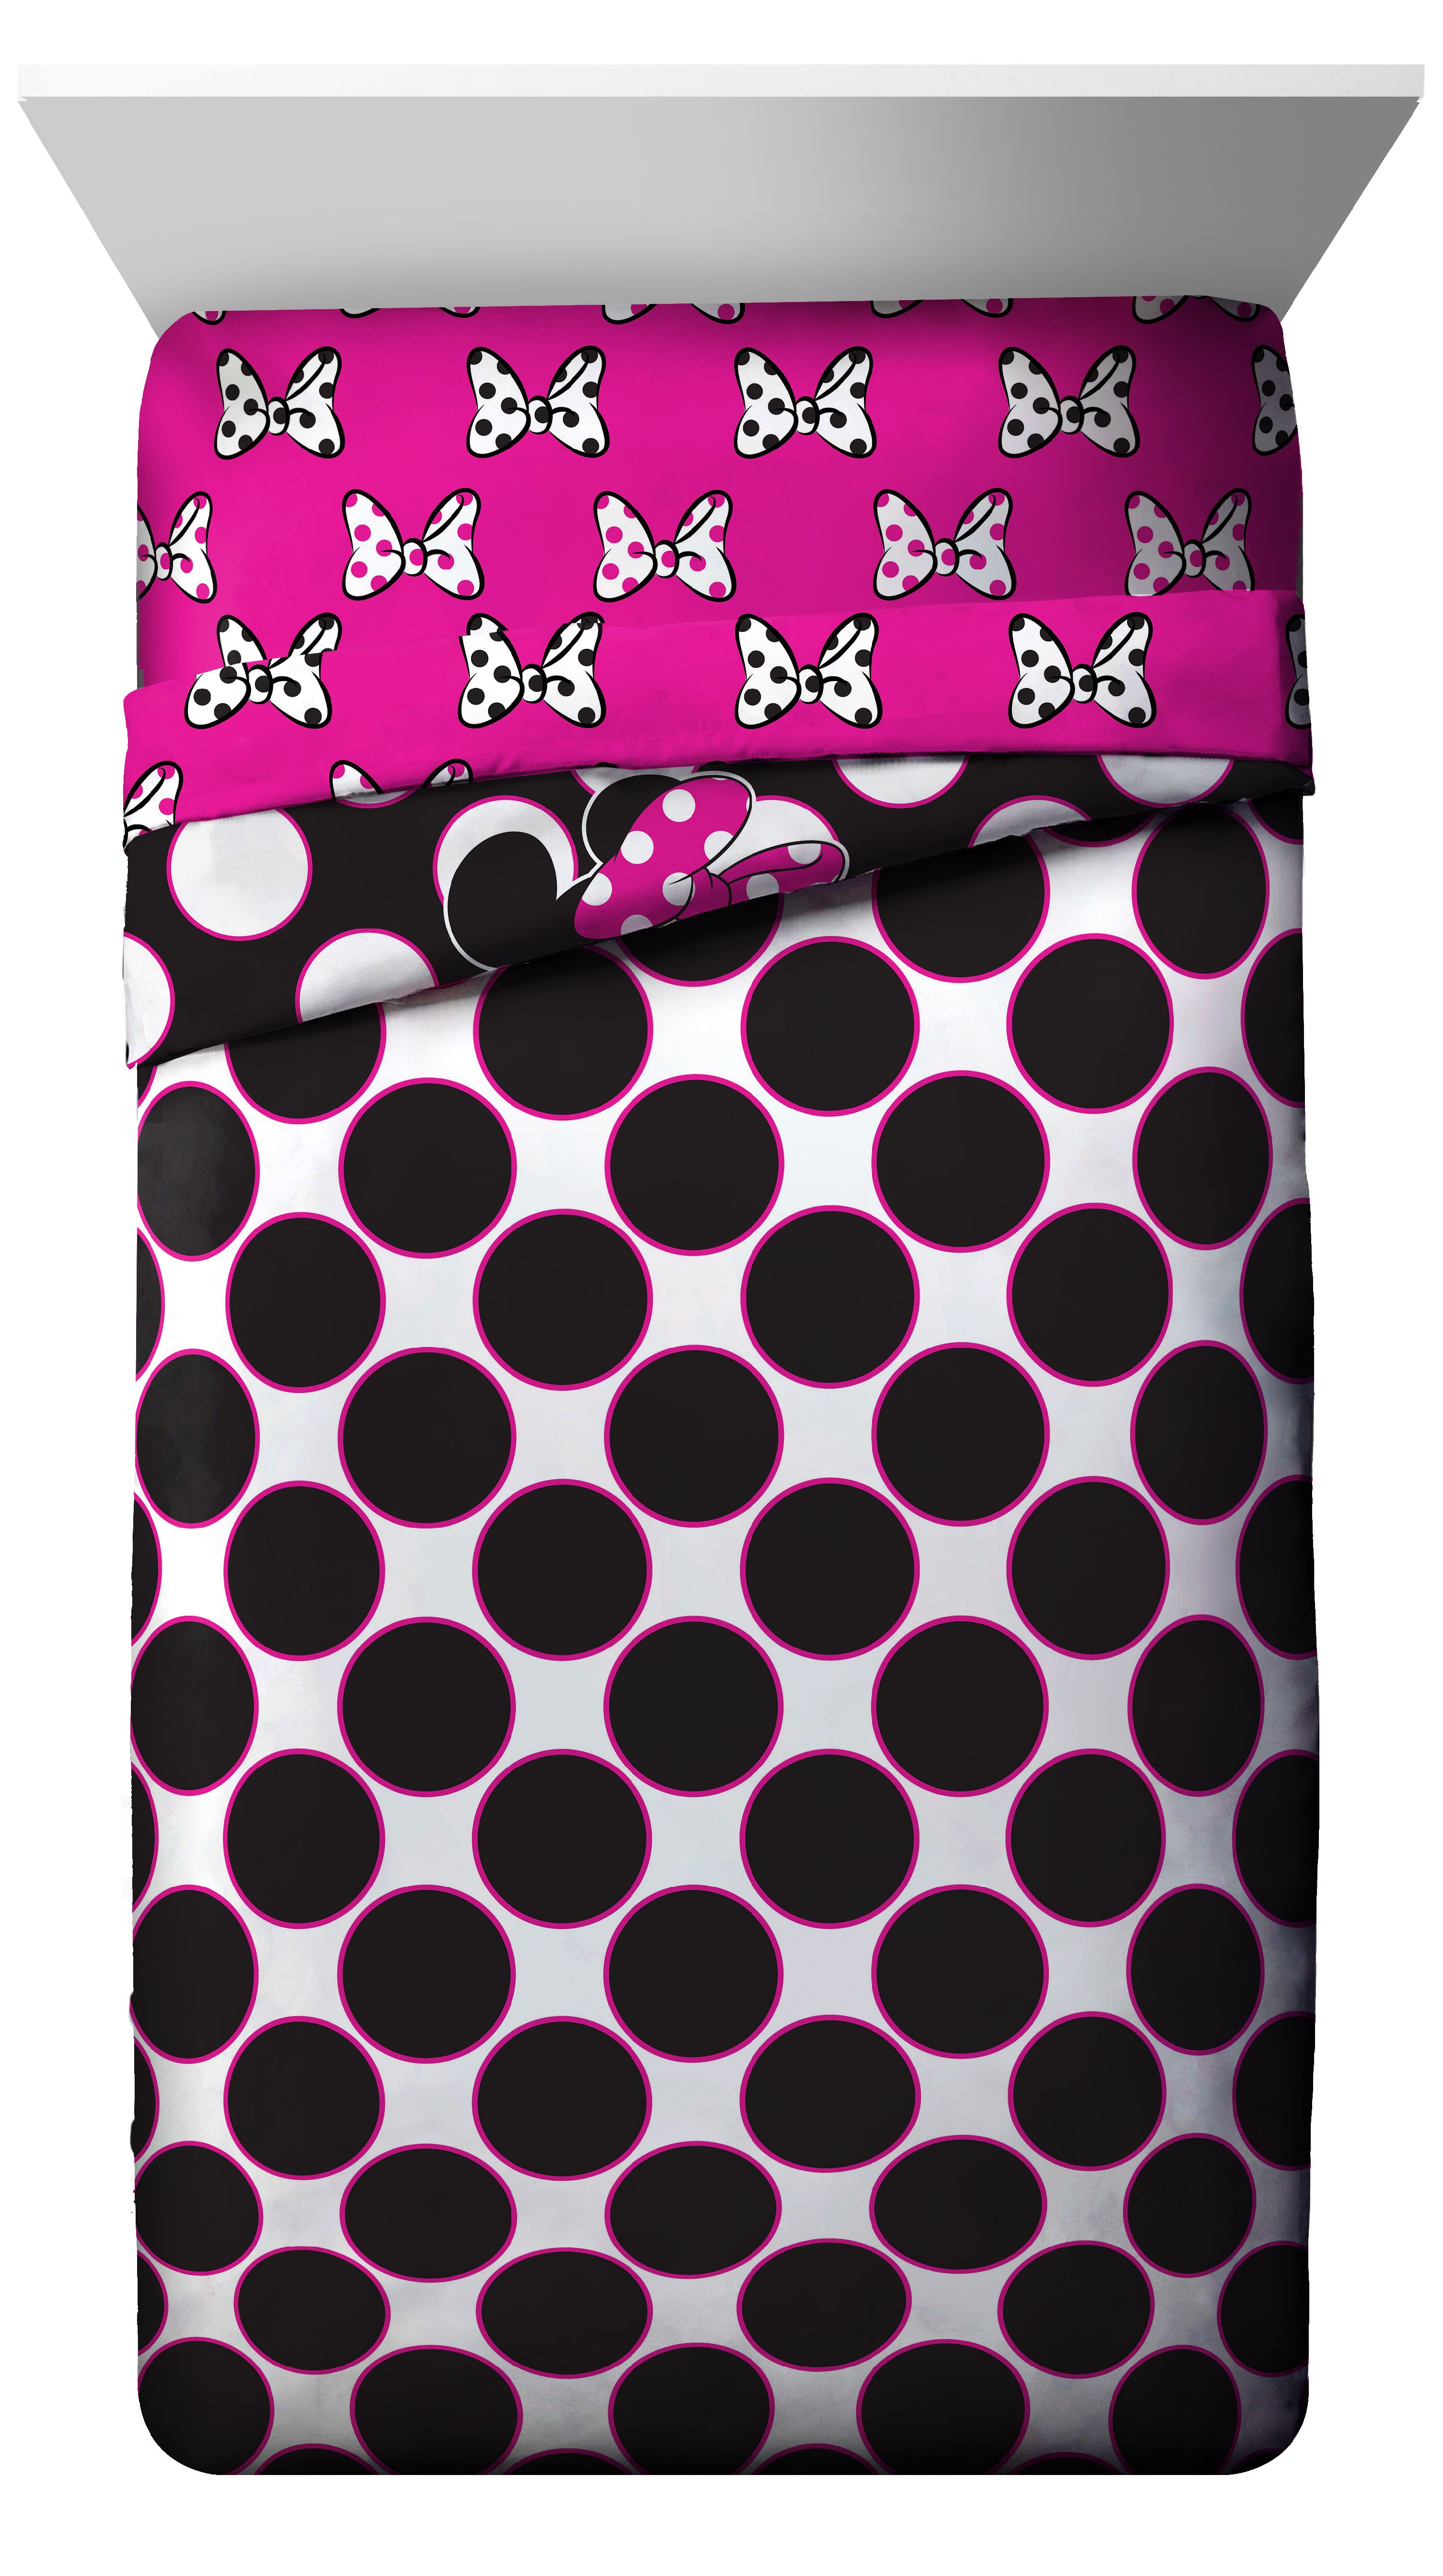 Minnie Mouse Reversible Twin/Full Comforter - image 3 of 3